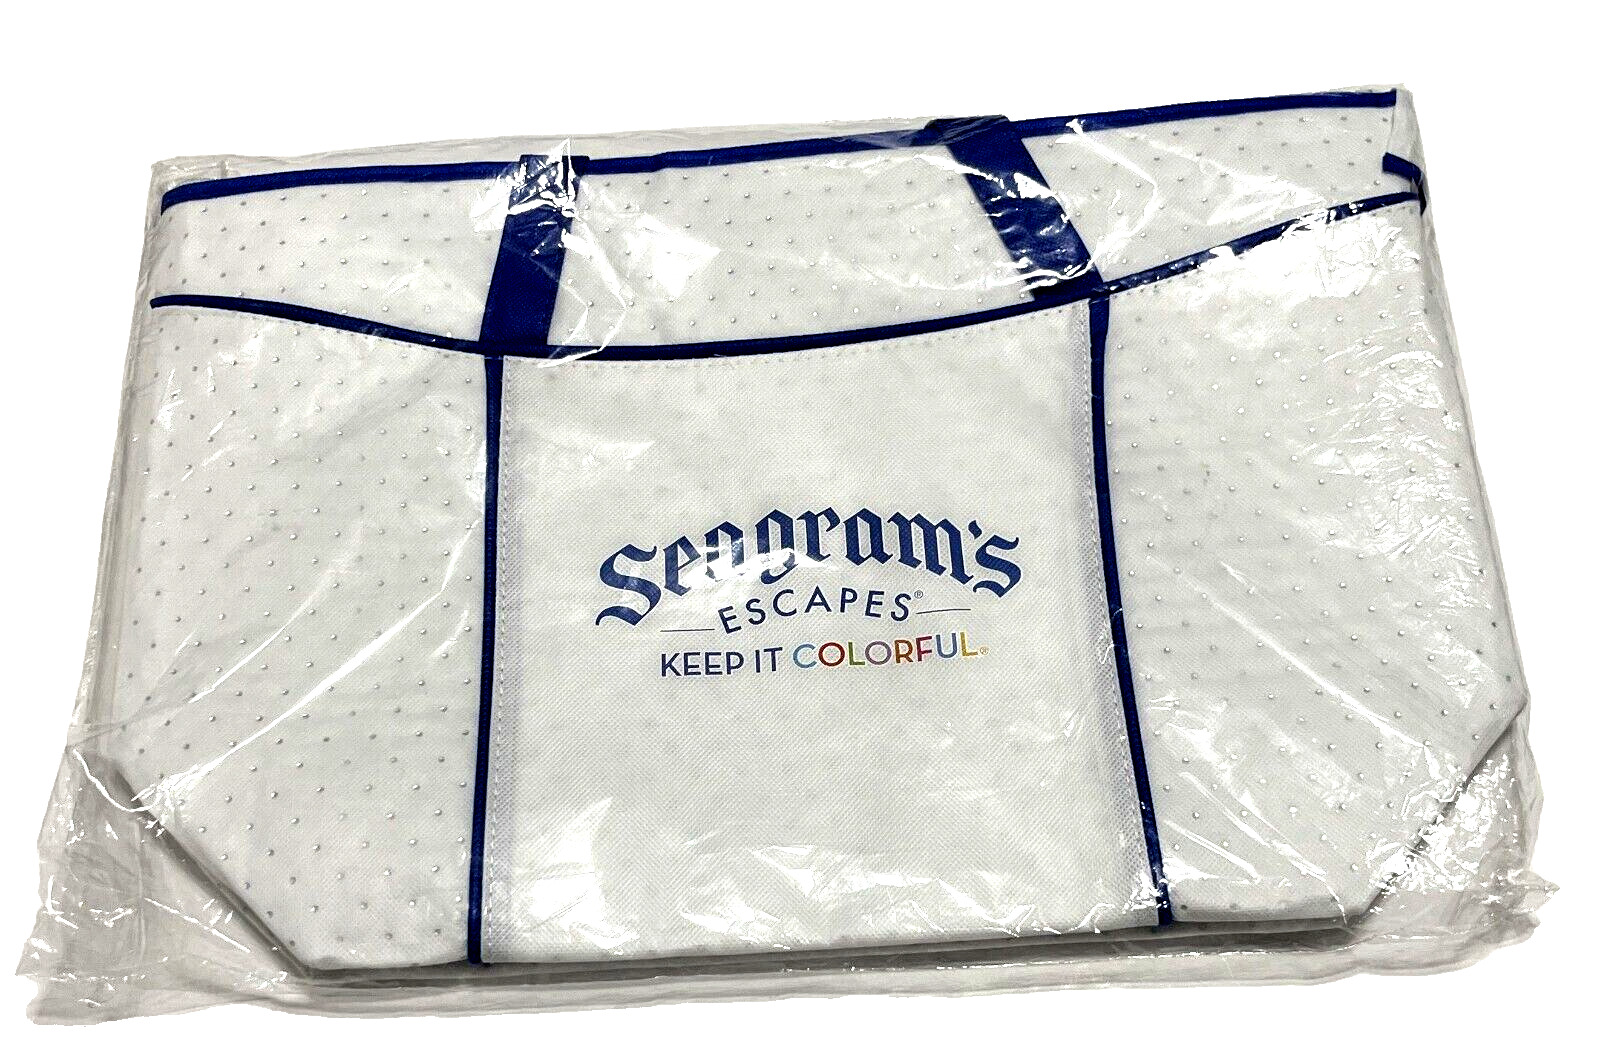 SEAGRAM\'S Escapes Insulated White Blue Beach Carrying Tote Cooler Bag NEW